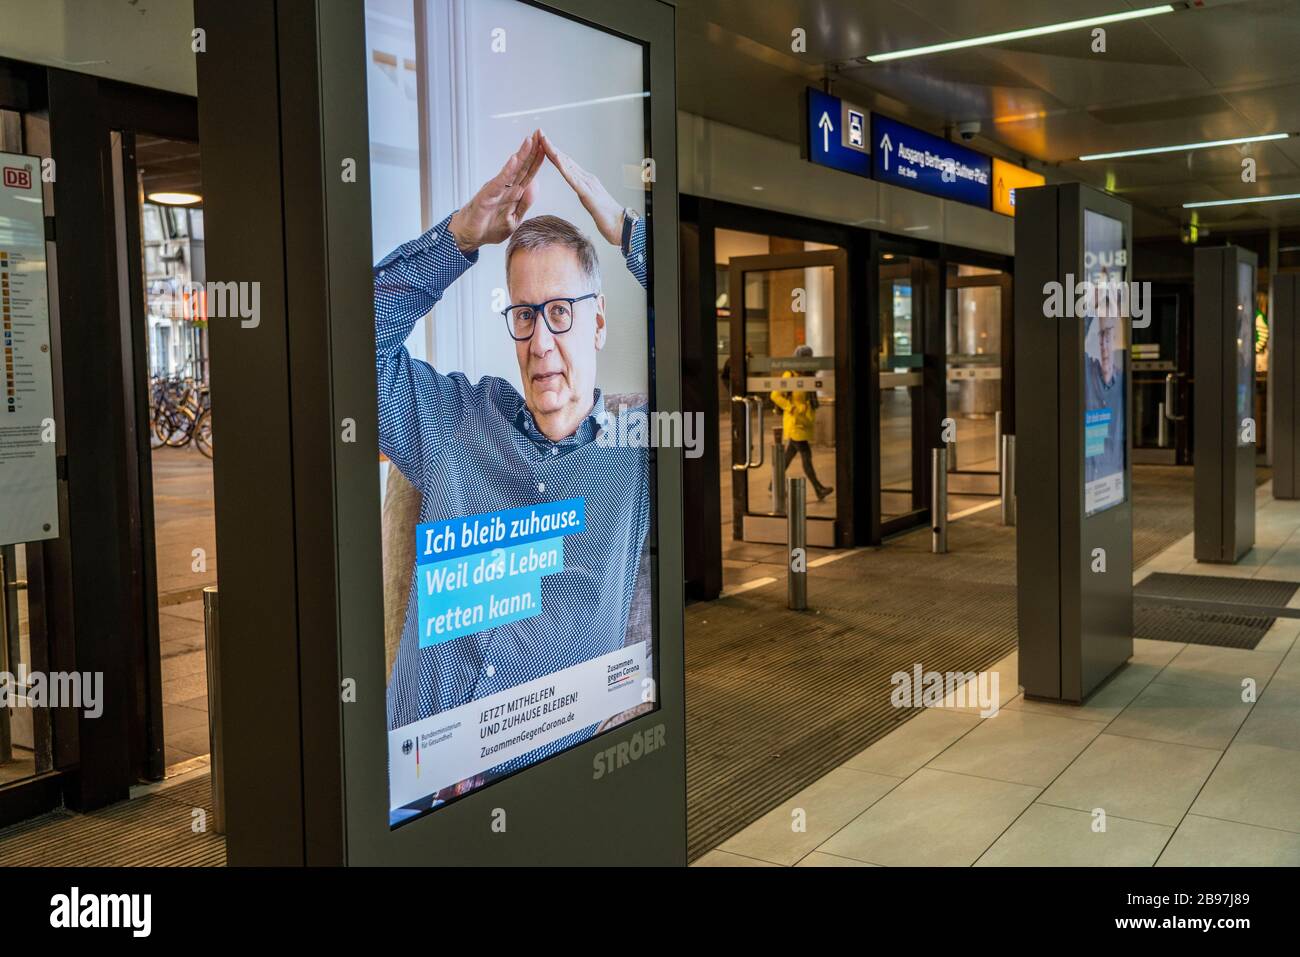 Displays with PR campaign of the Federal Government, Ich bleib Zuhause, Hauptbahnhof, Effects of the Coronavirus Pandemic in Germany, DŸsseldorf Stock Photo